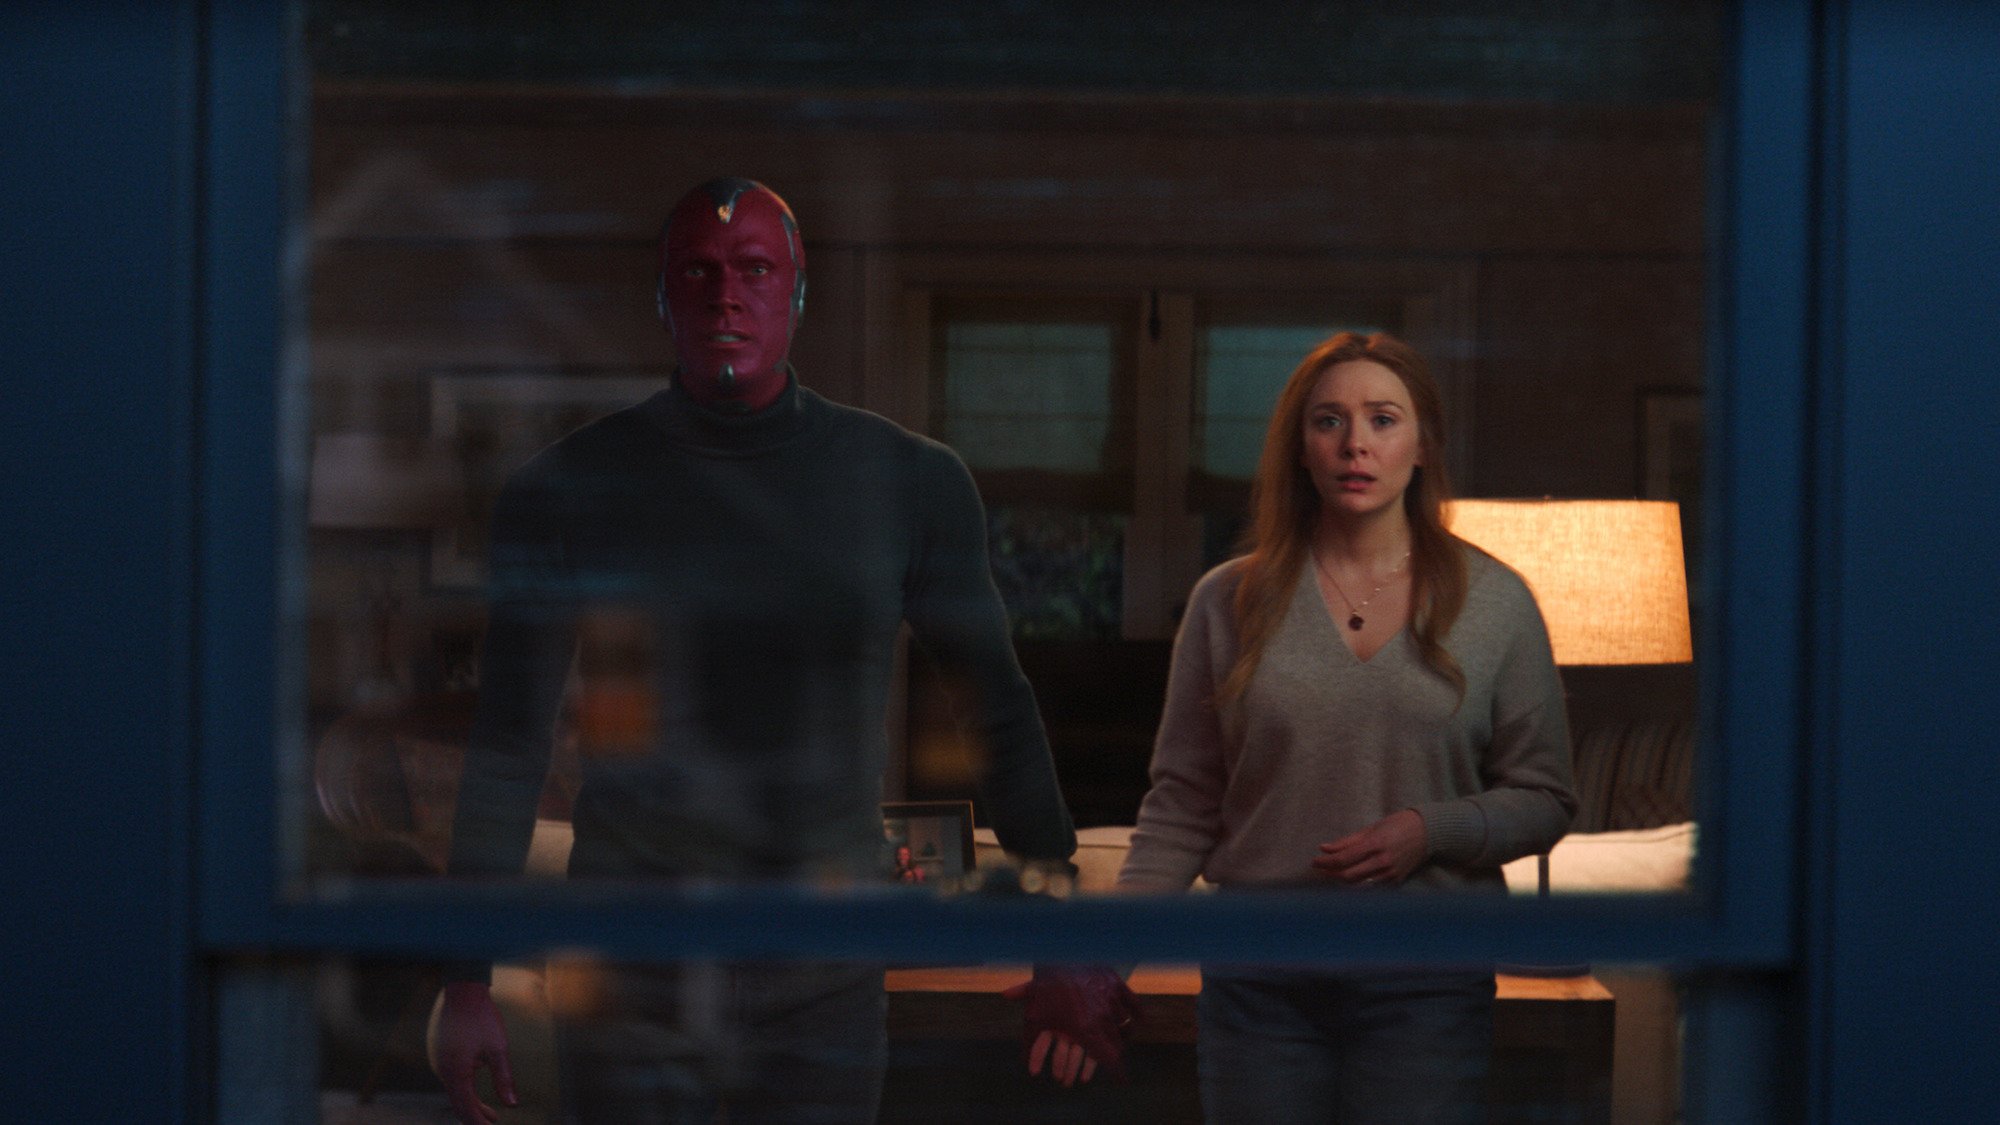 Vision (Paul Bettany) and Wanda Maximoff (Elizabeth Olsen) in the finale of 'WandaVision'